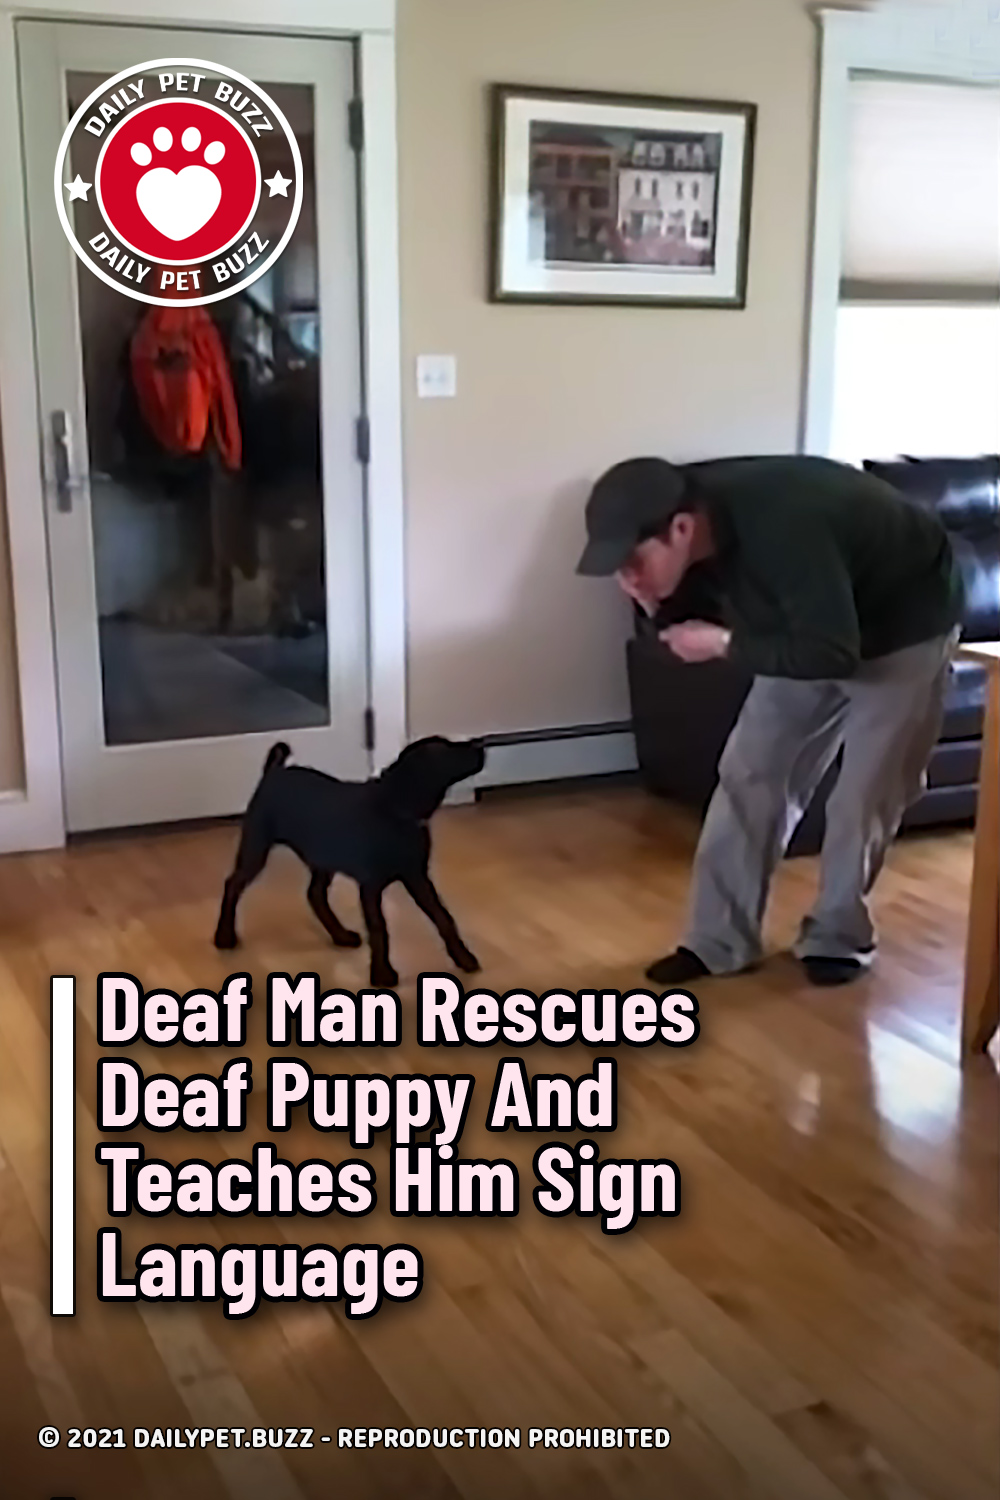 Deaf Man Rescues Deaf Puppy And Teaches Him Sign Language